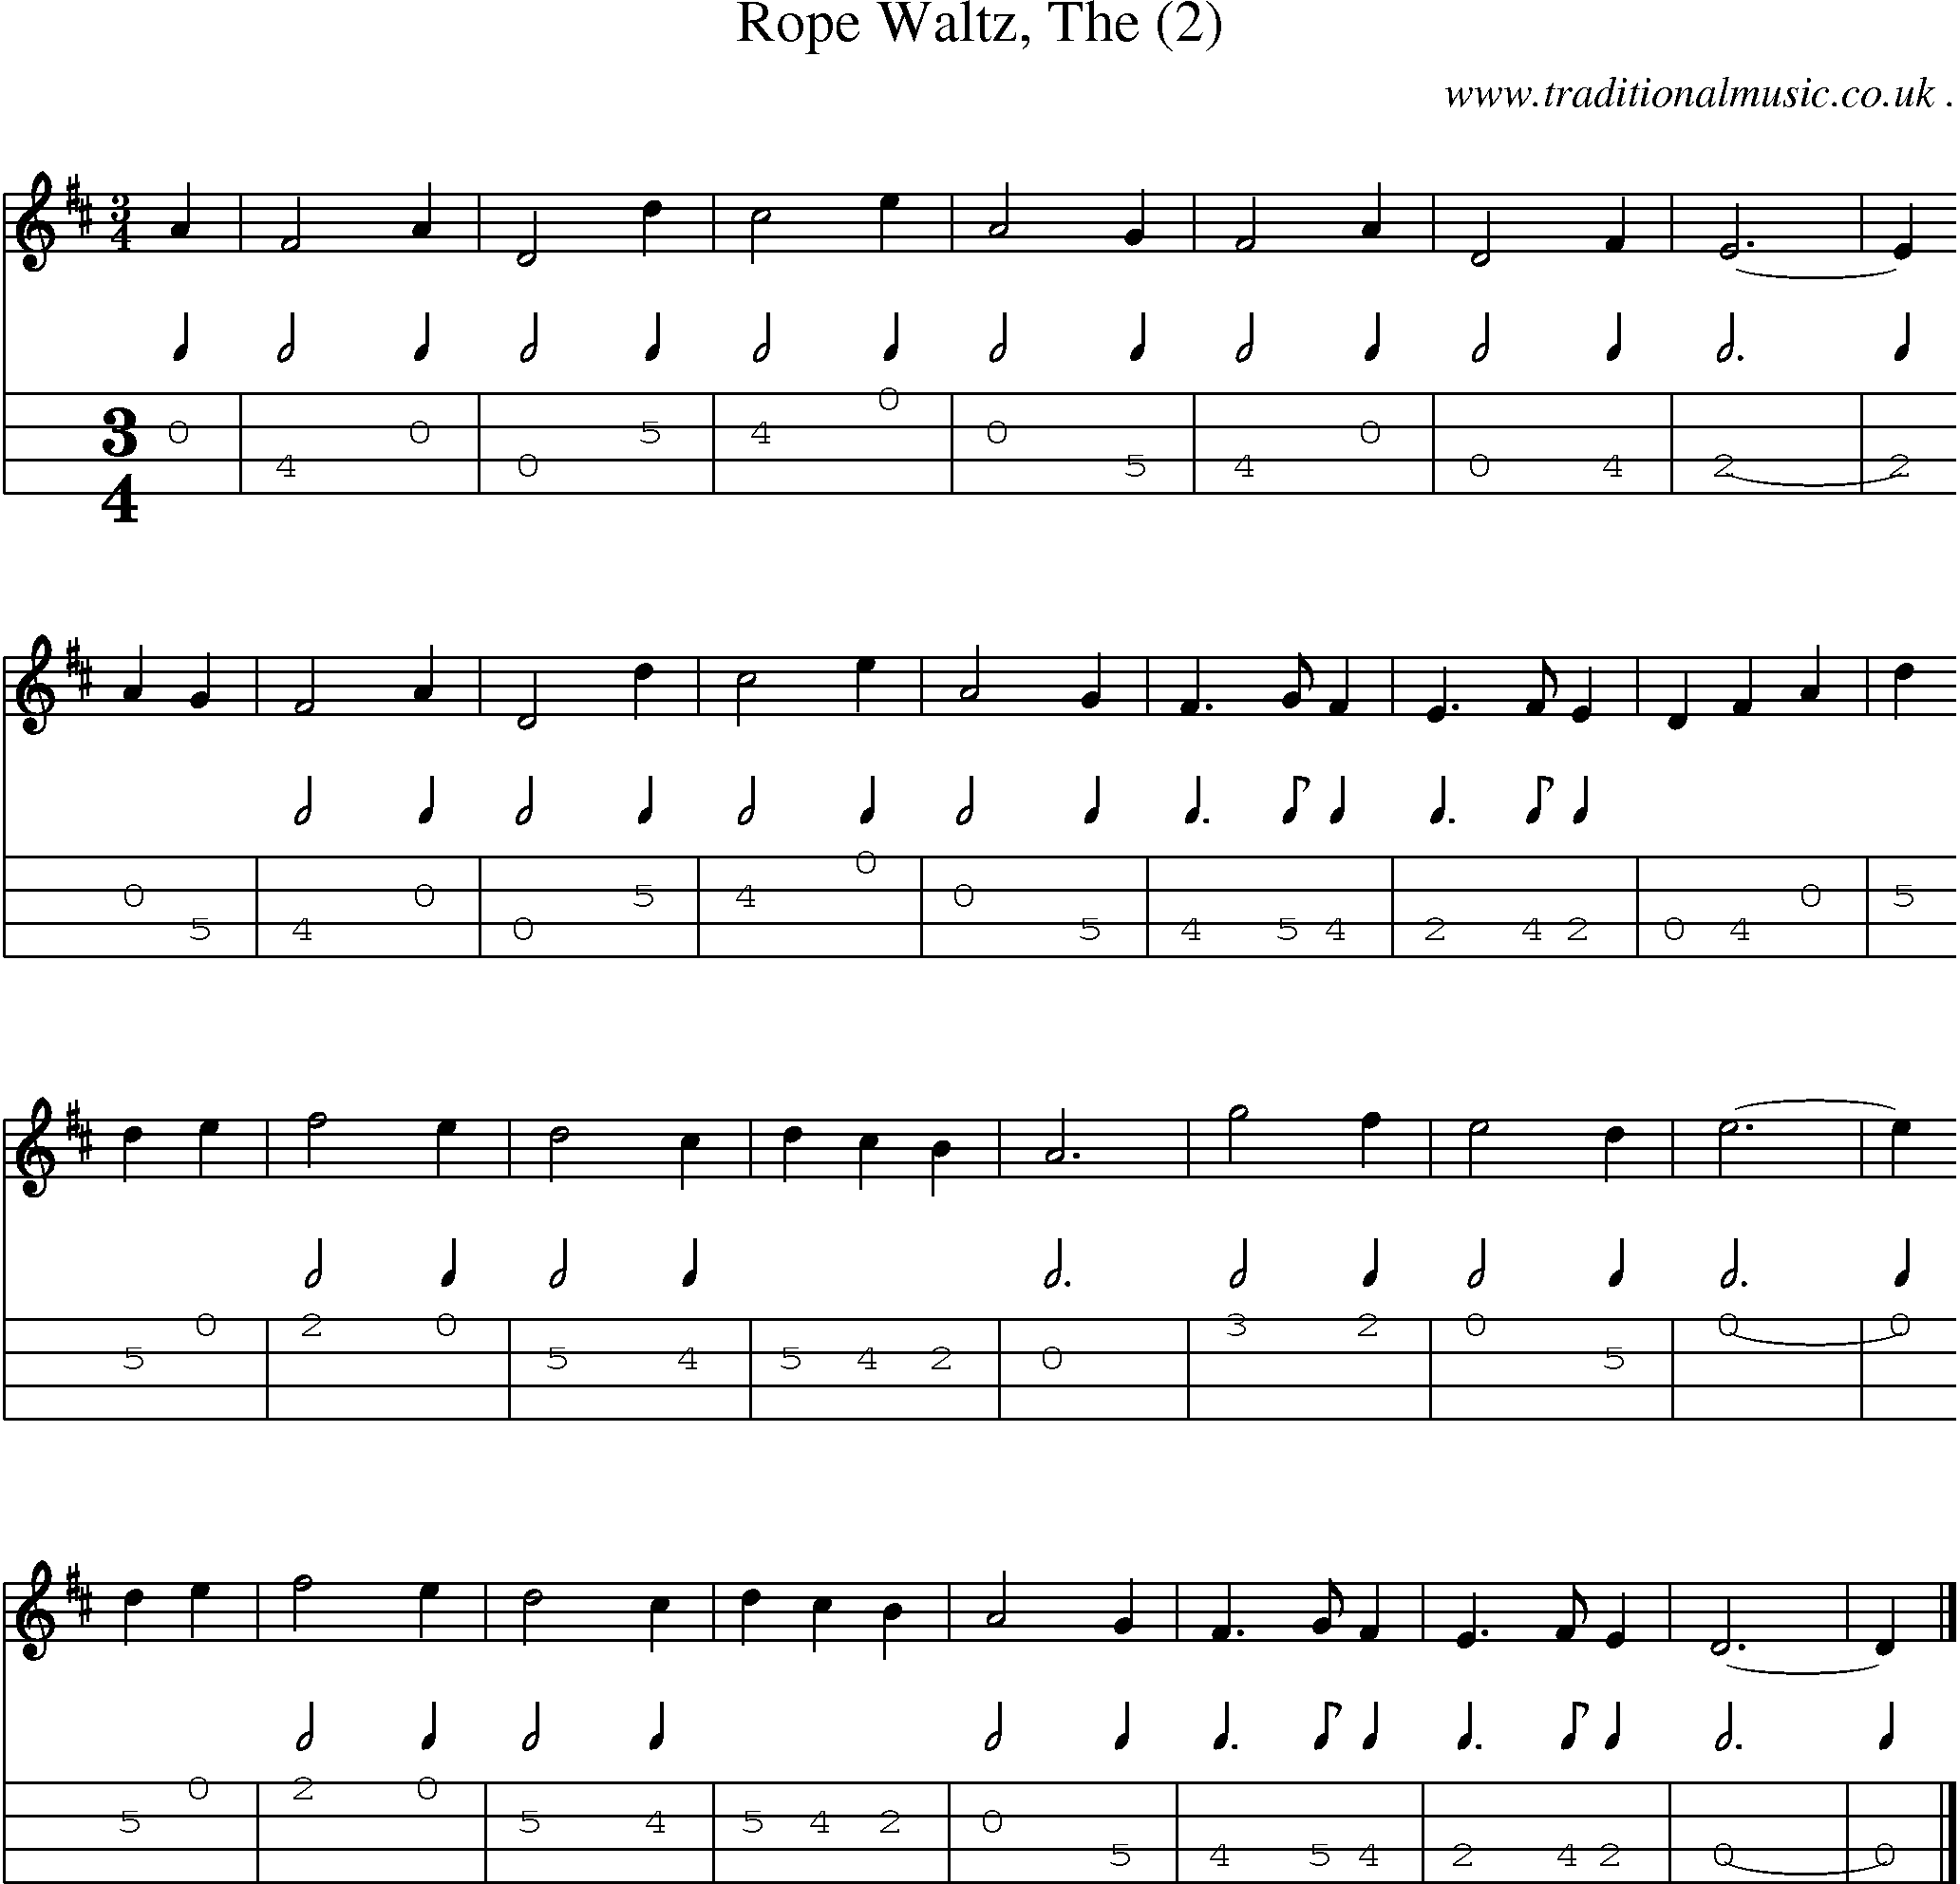 Sheet-music  score, Chords and Mandolin Tabs for Rope Waltz The 2